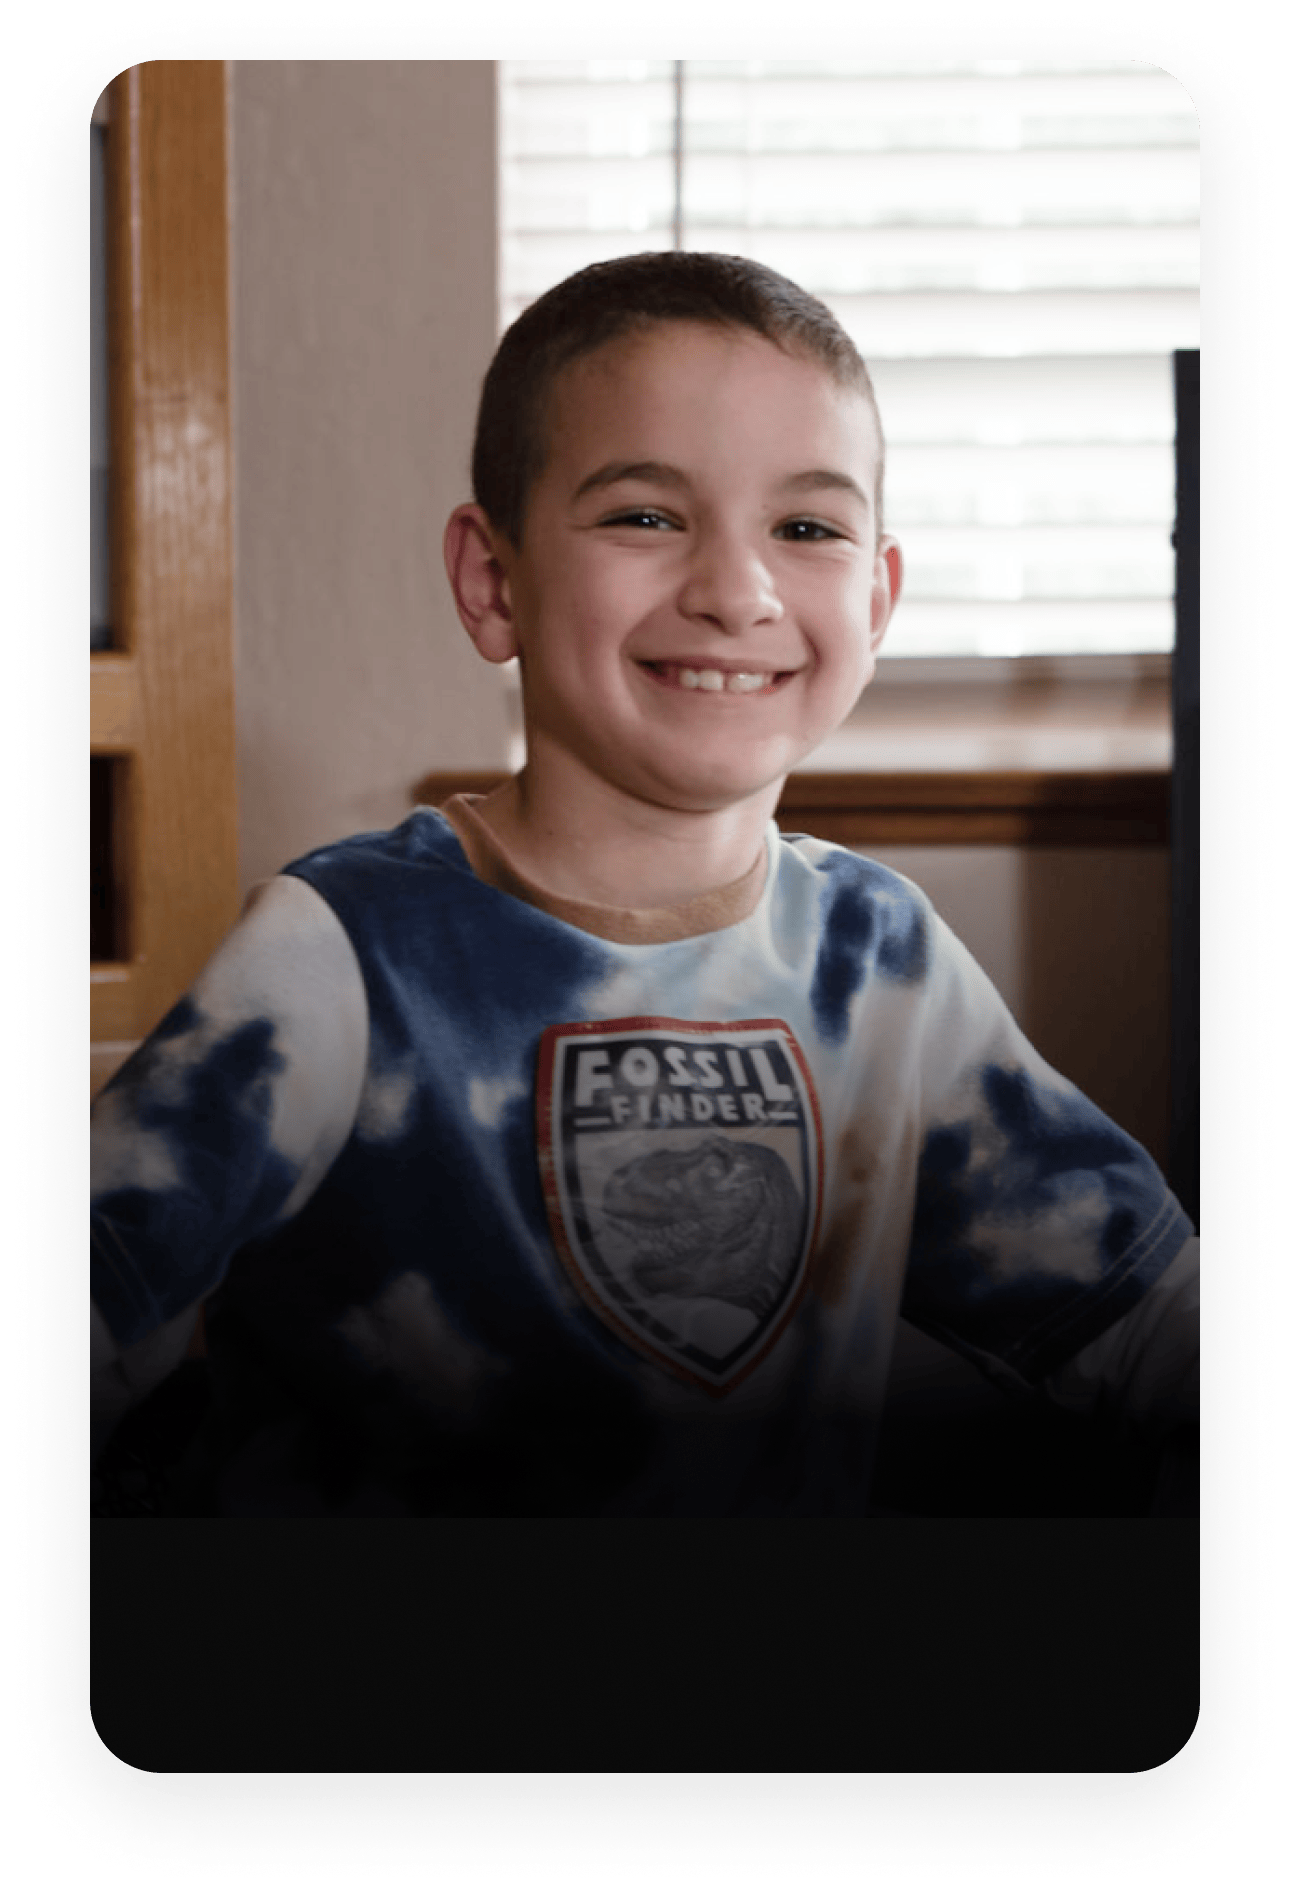 Day in the Life image 10 (name Keegan Stories Card)